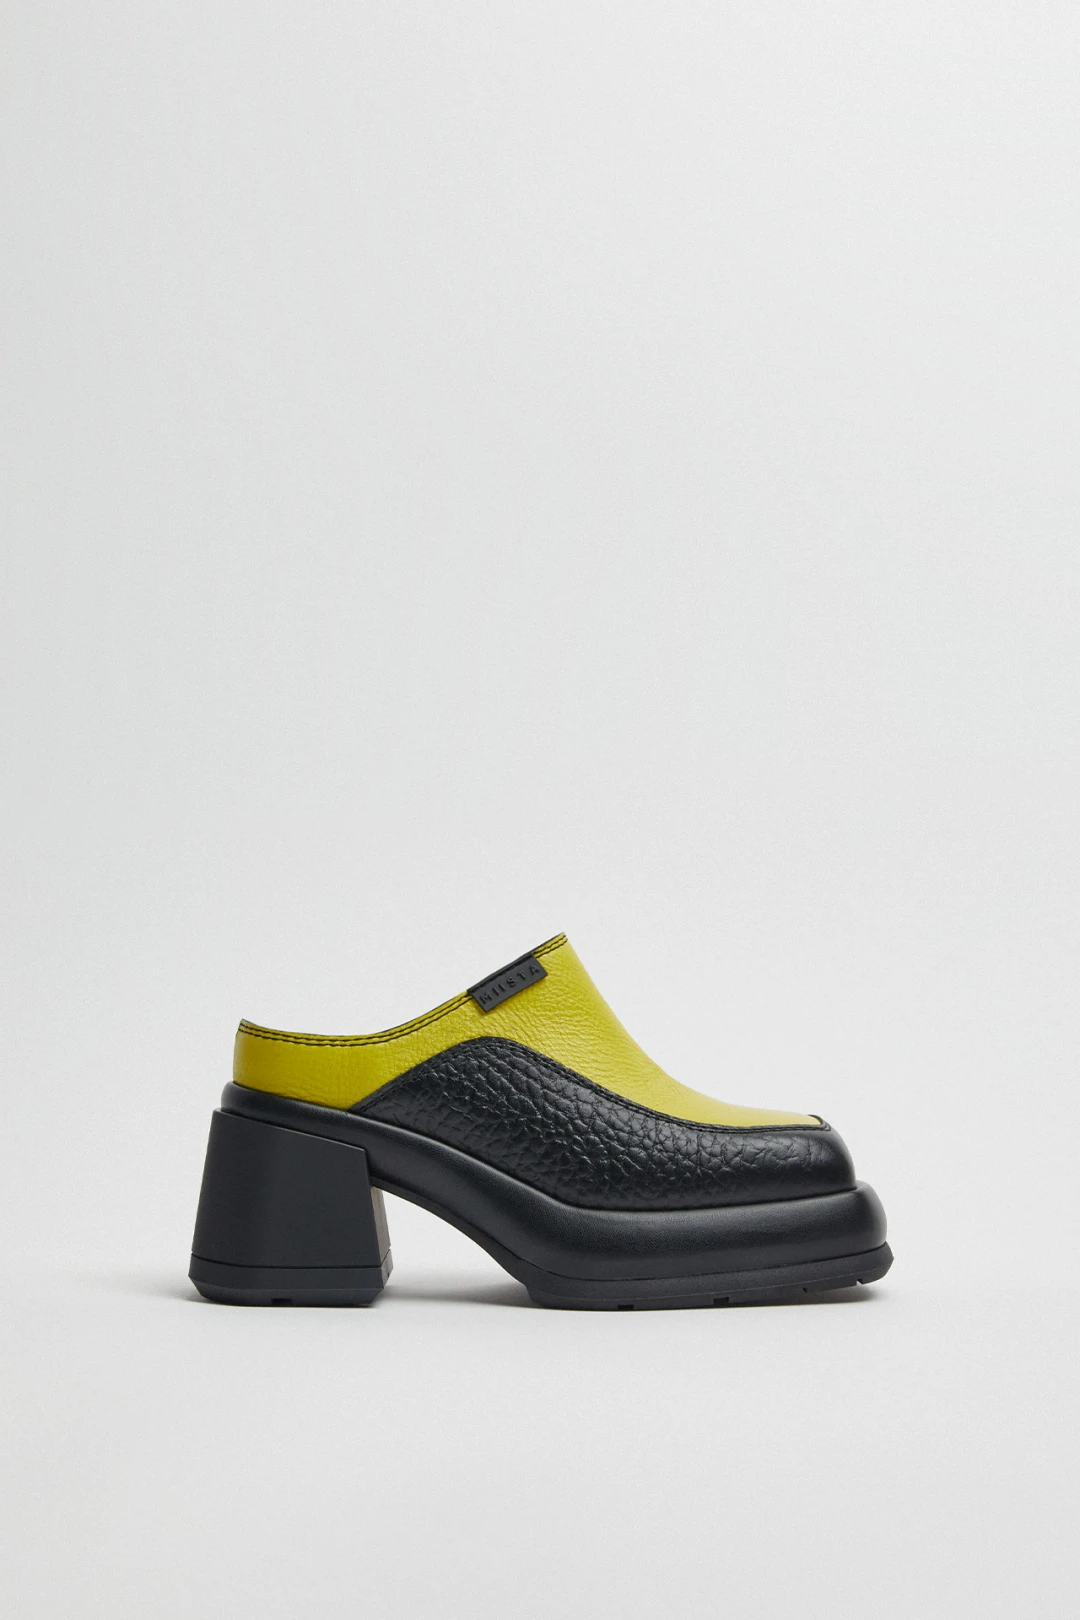 Bethania Lime Mules | Miista Europe | Made in Portugal